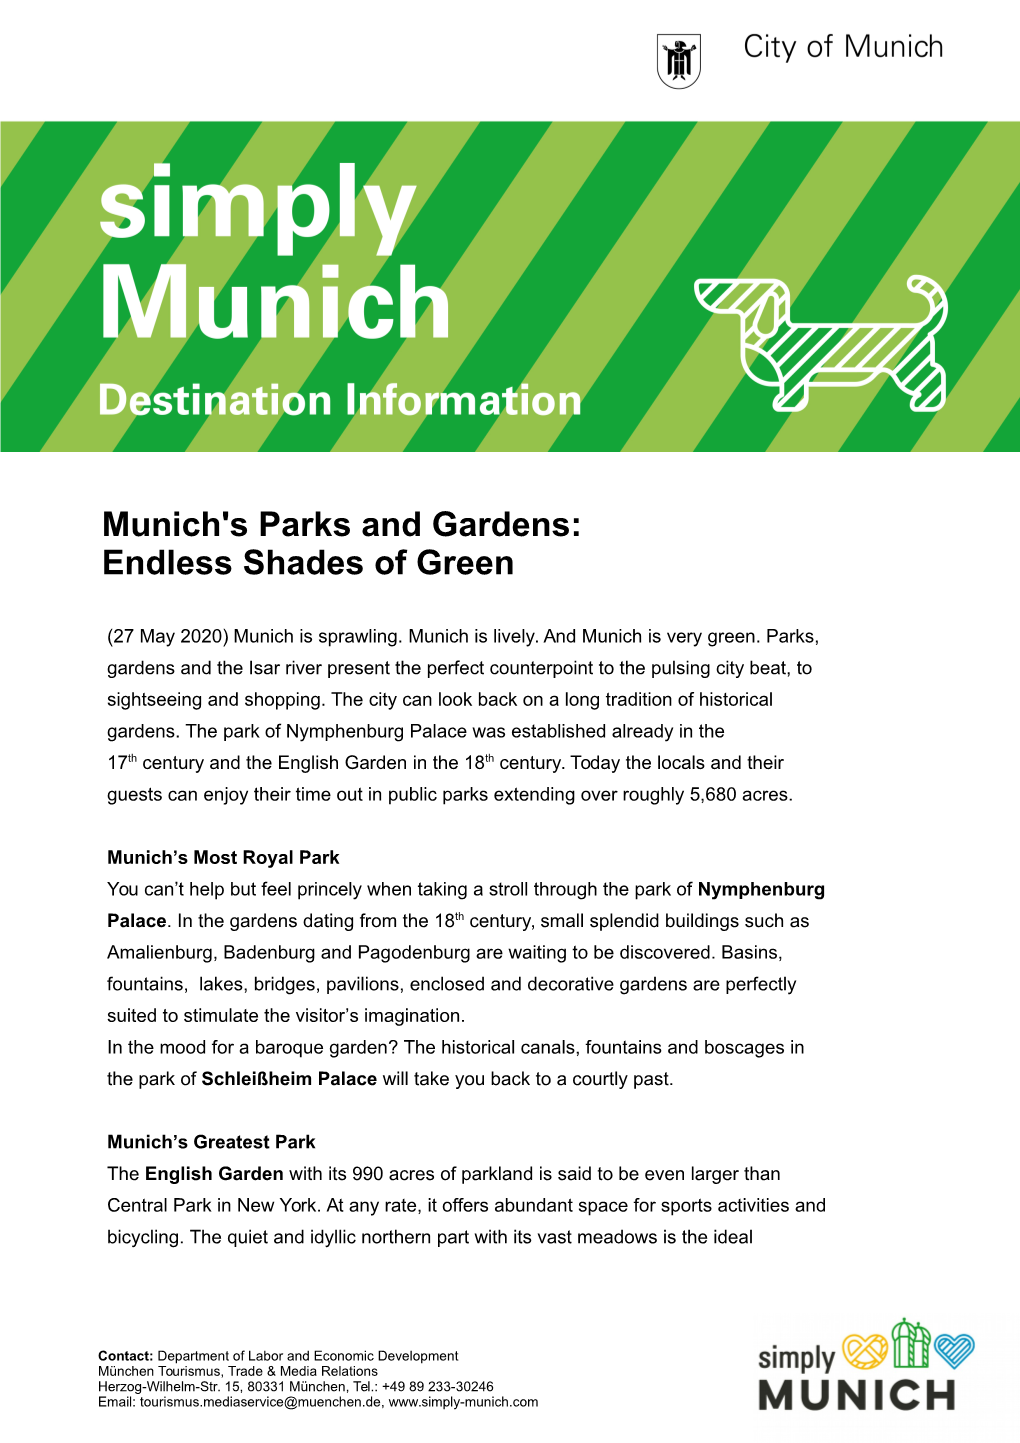 Munich's Parks and Gardens: Endless Shades of Green